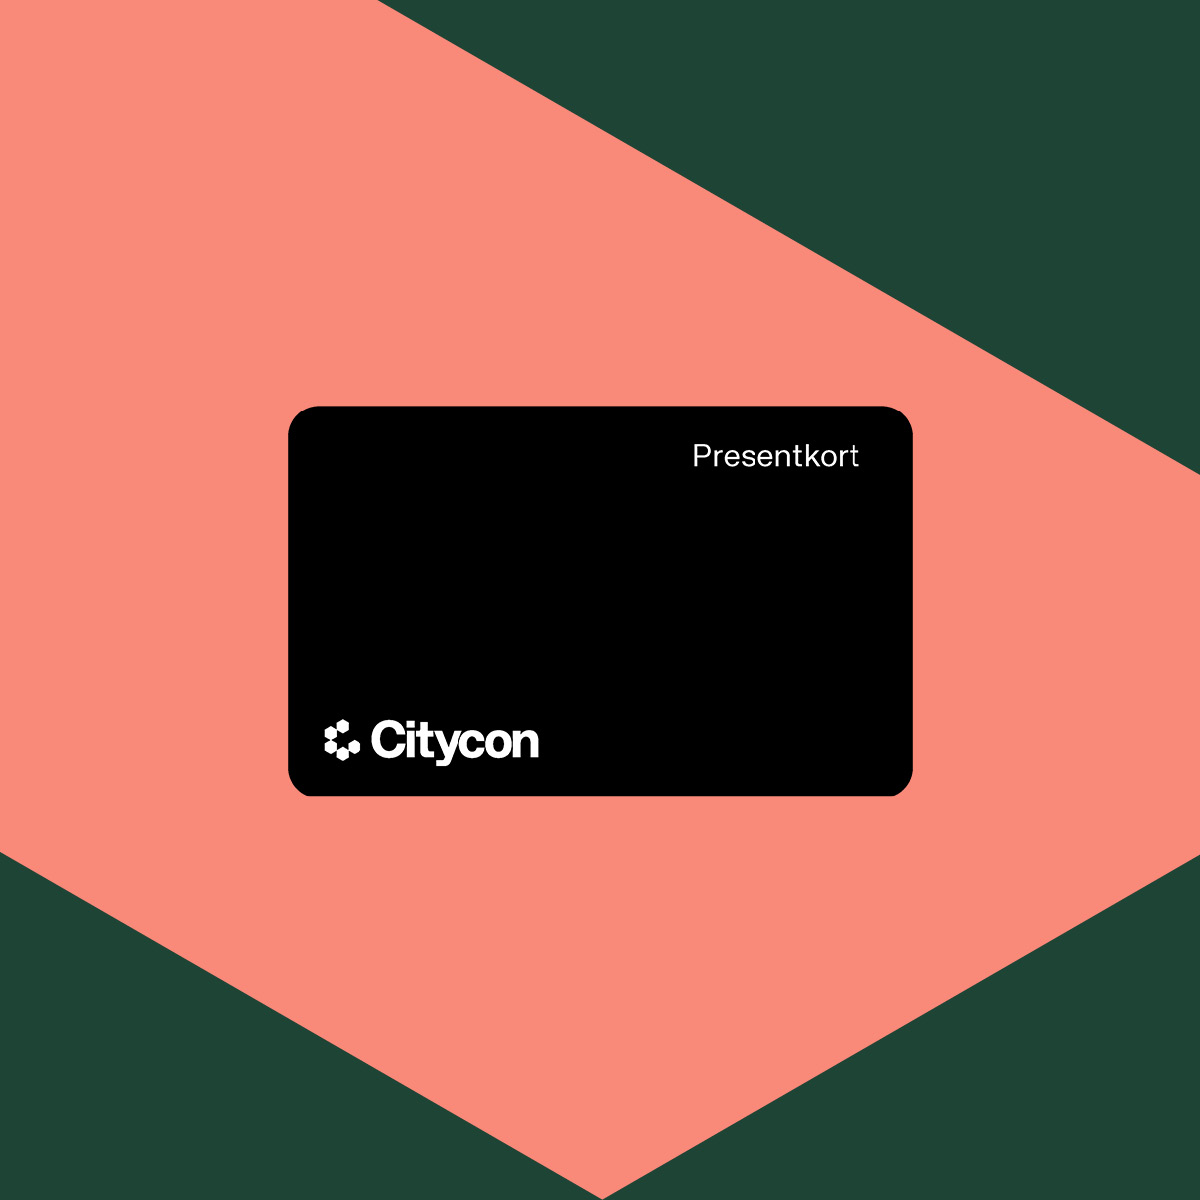 CINC_Webpage_Banners_Sub-page_giftcard_lift-section_SWE_CoralGreen